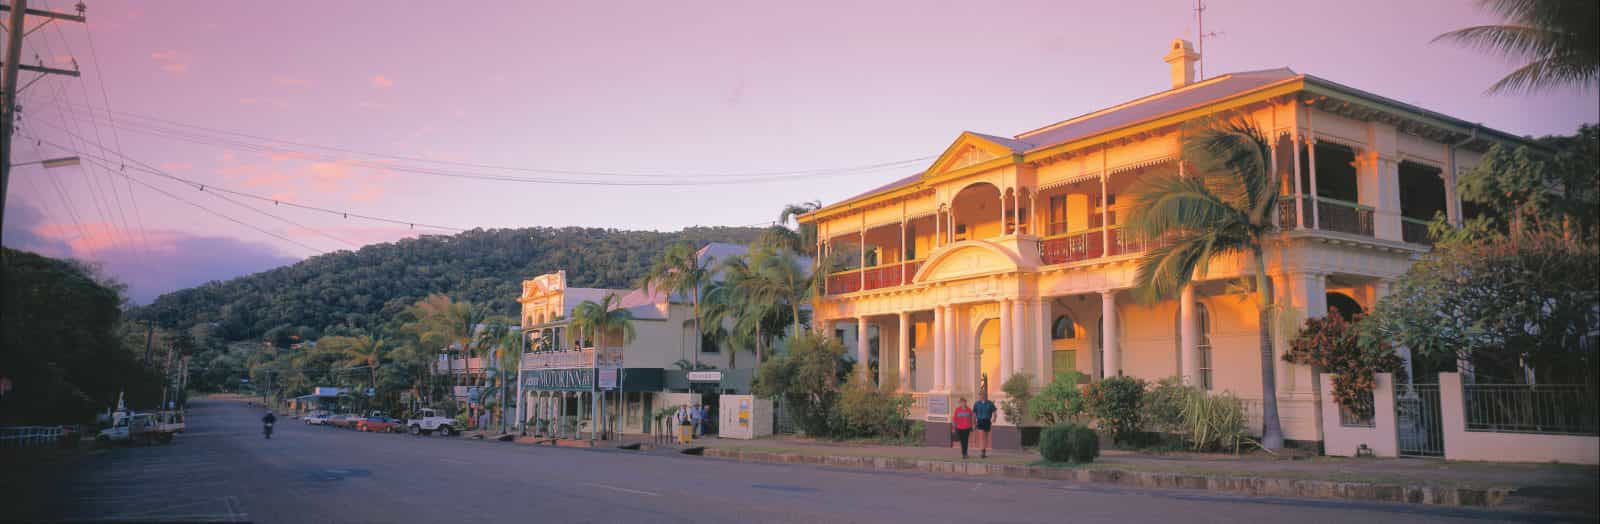 Cooktown streetscape